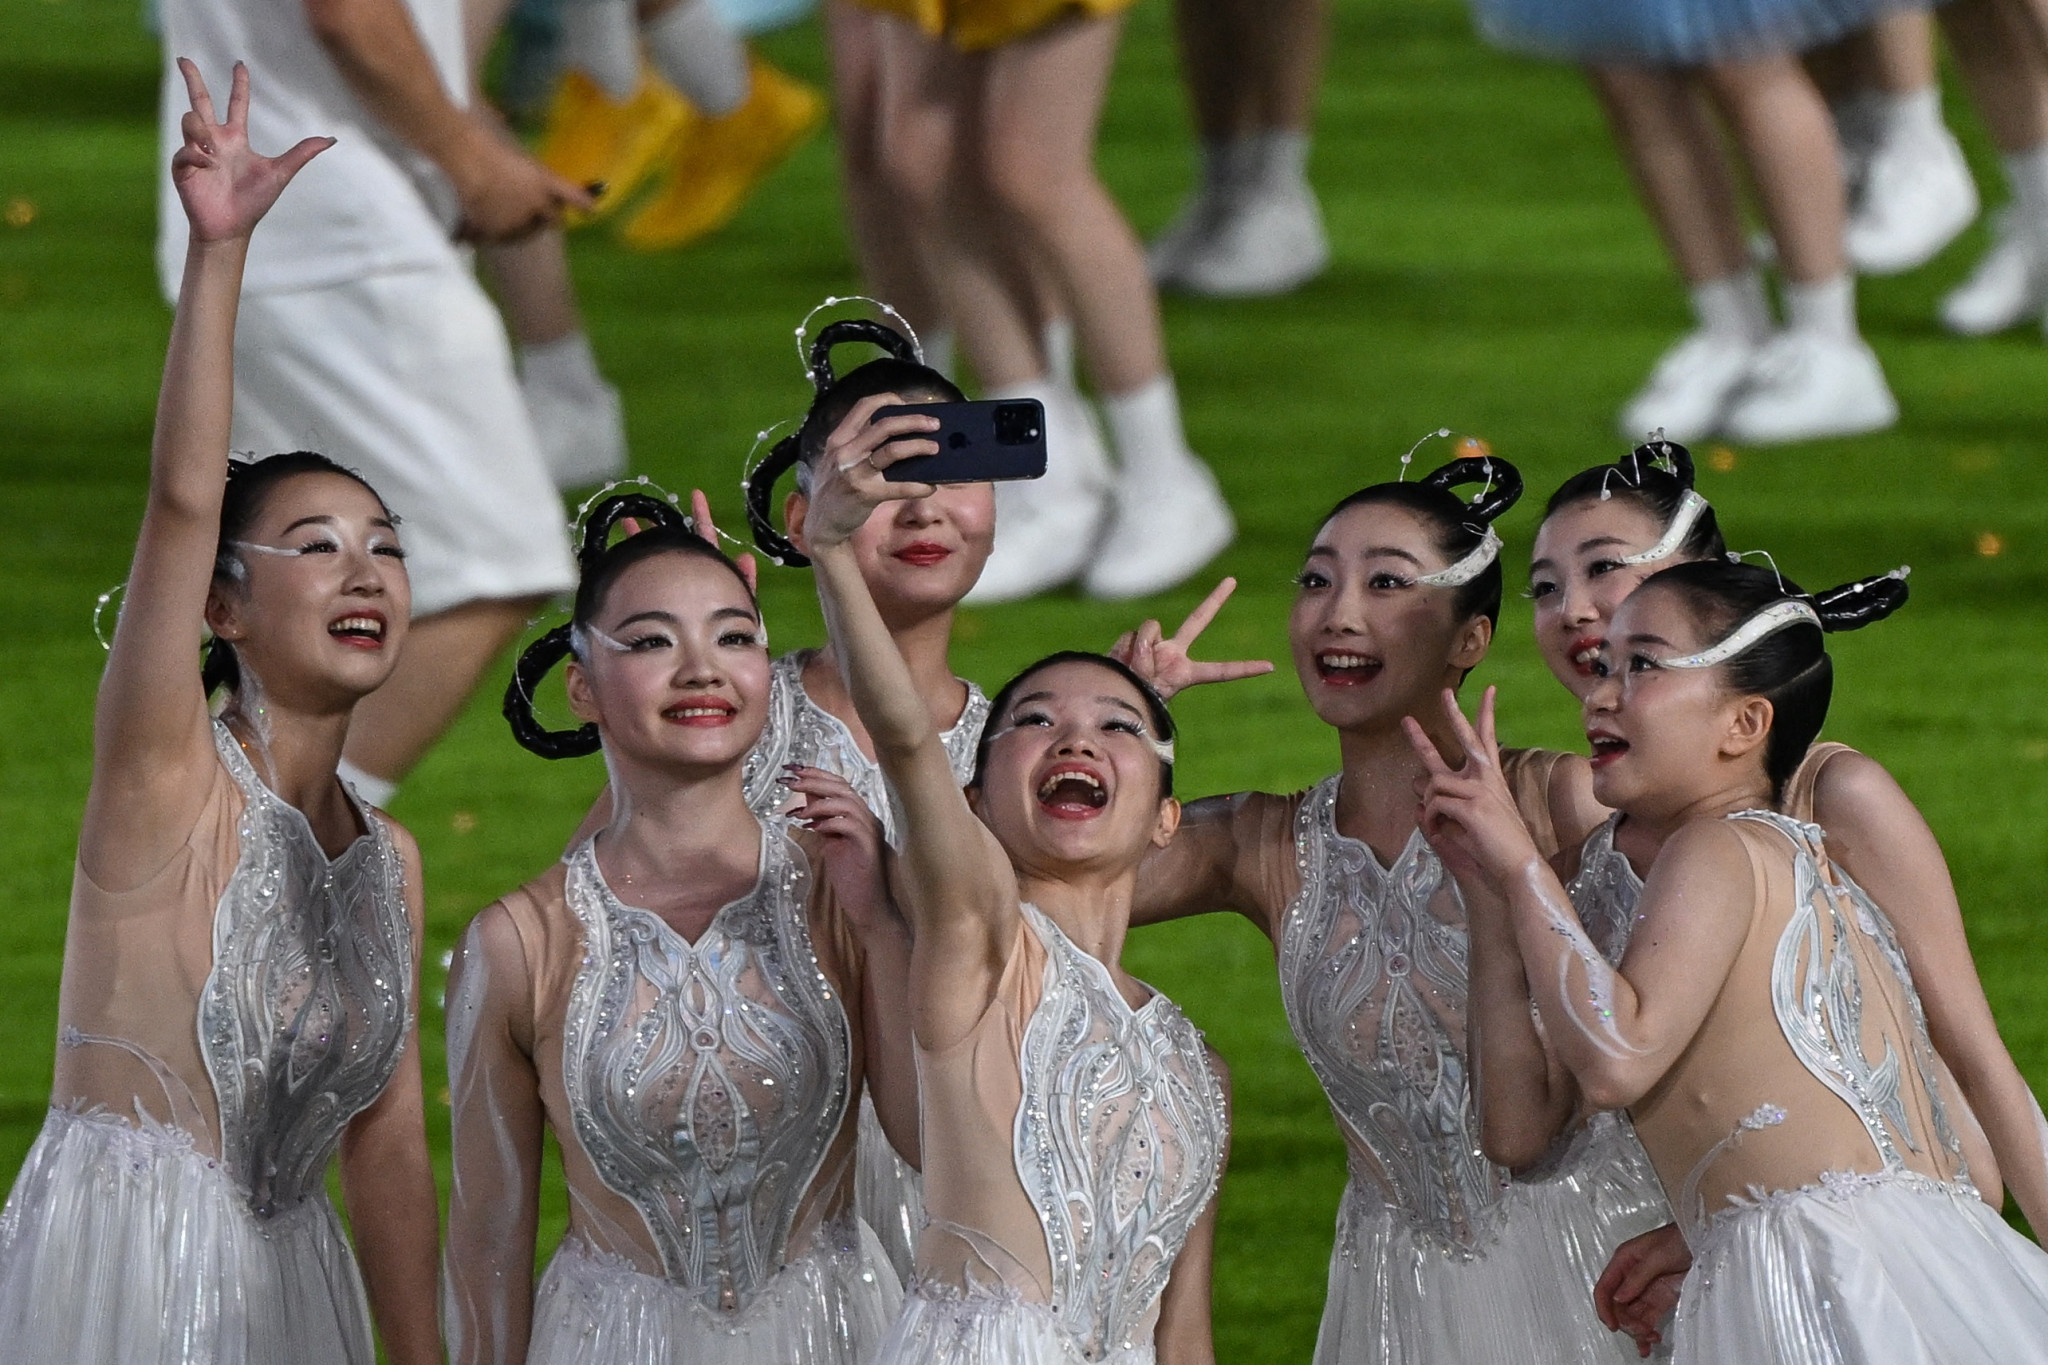 Performers enjoy their moment at the Hangzhou Olympic Sports Centre Stadium ©Getty Images